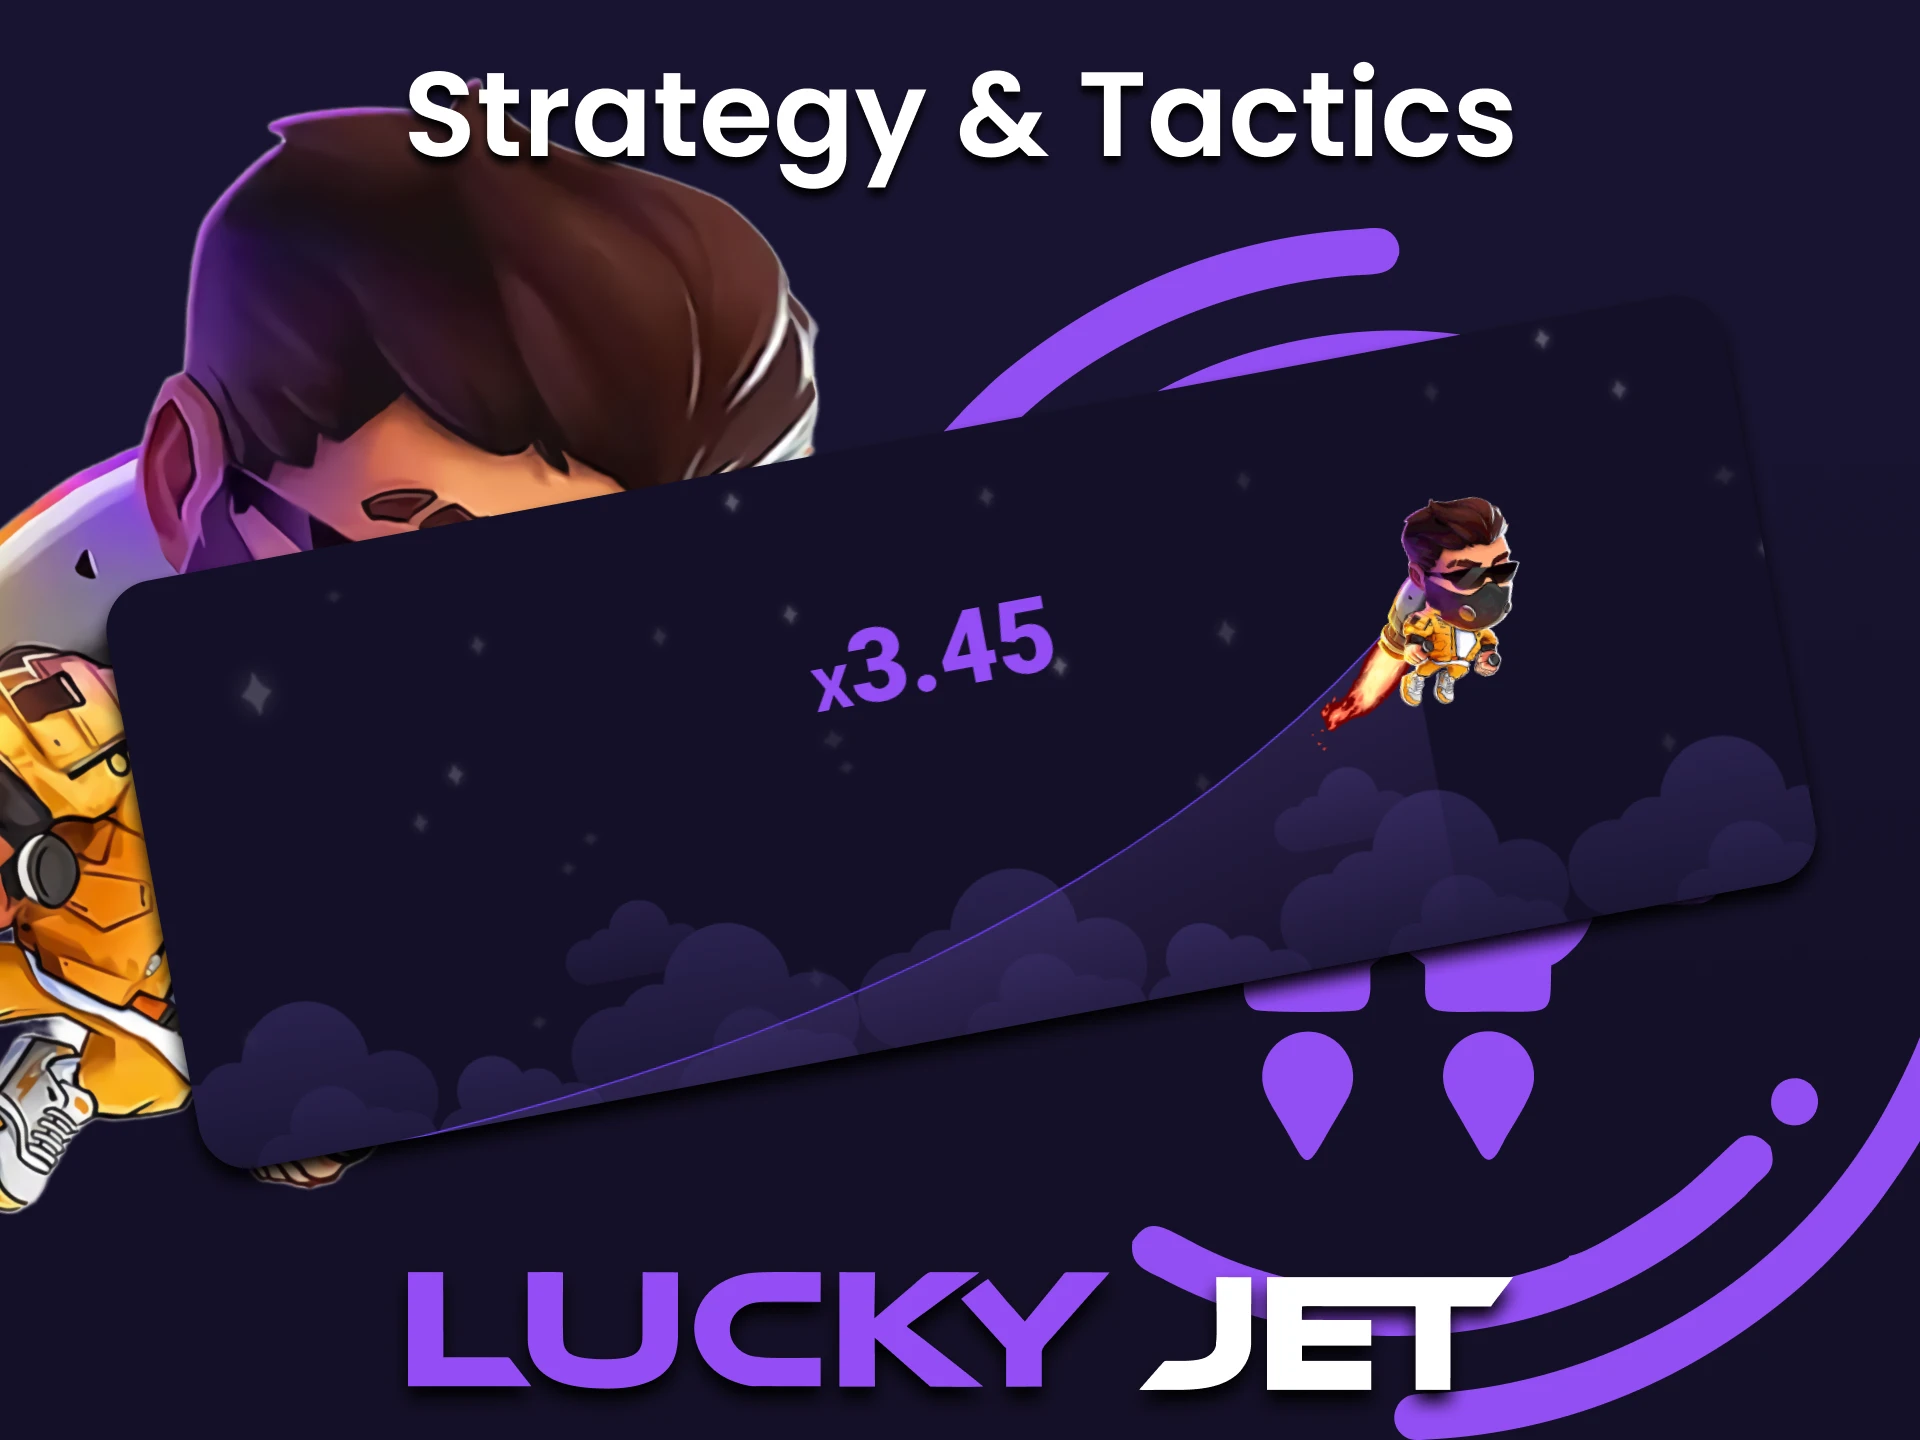 Use your full potential to win the Lucky Jet game.